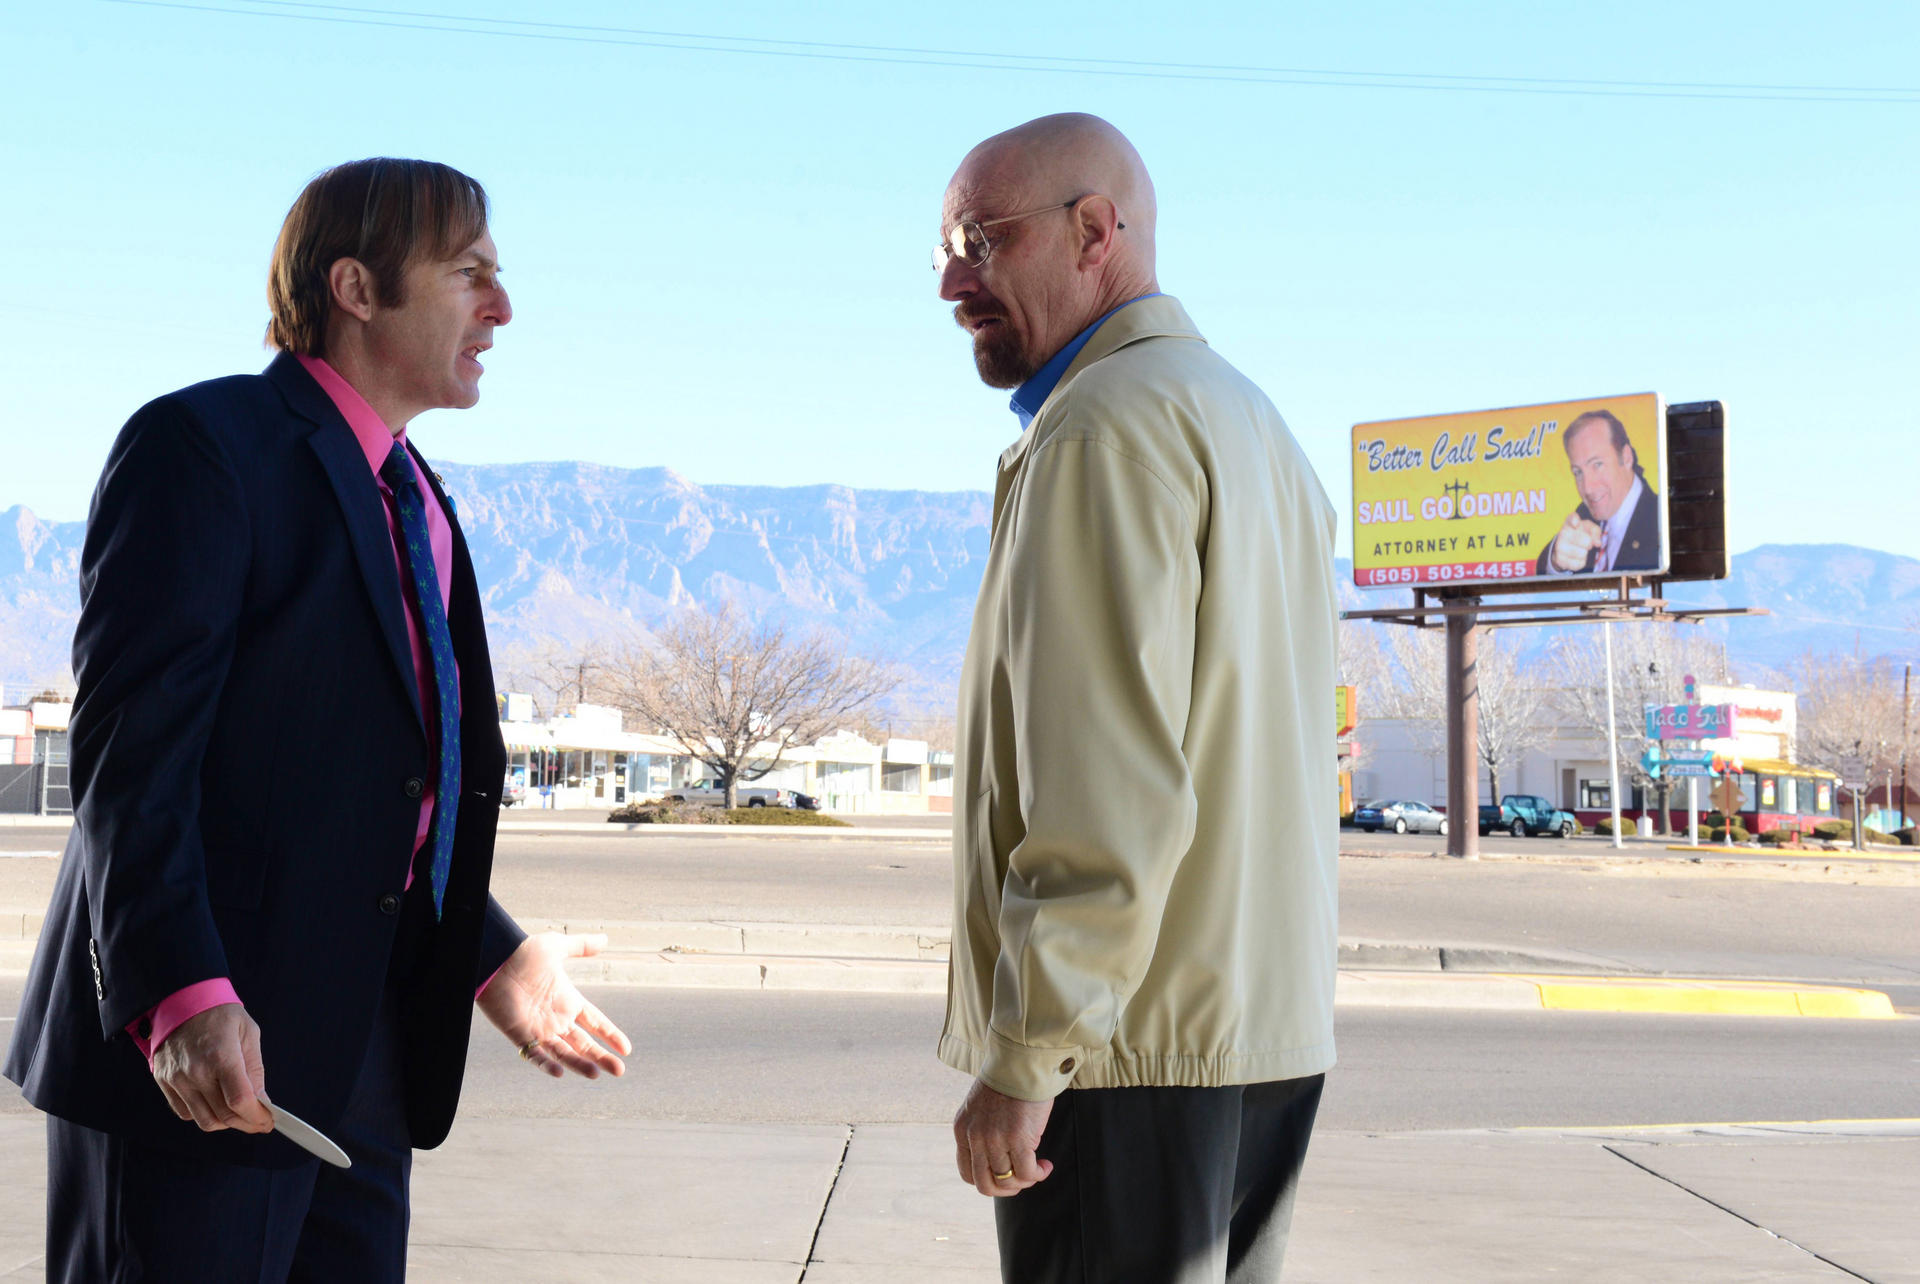 Bob Odenkirk and Bryan Cranston (playing Walter White) in Breaking Bad.